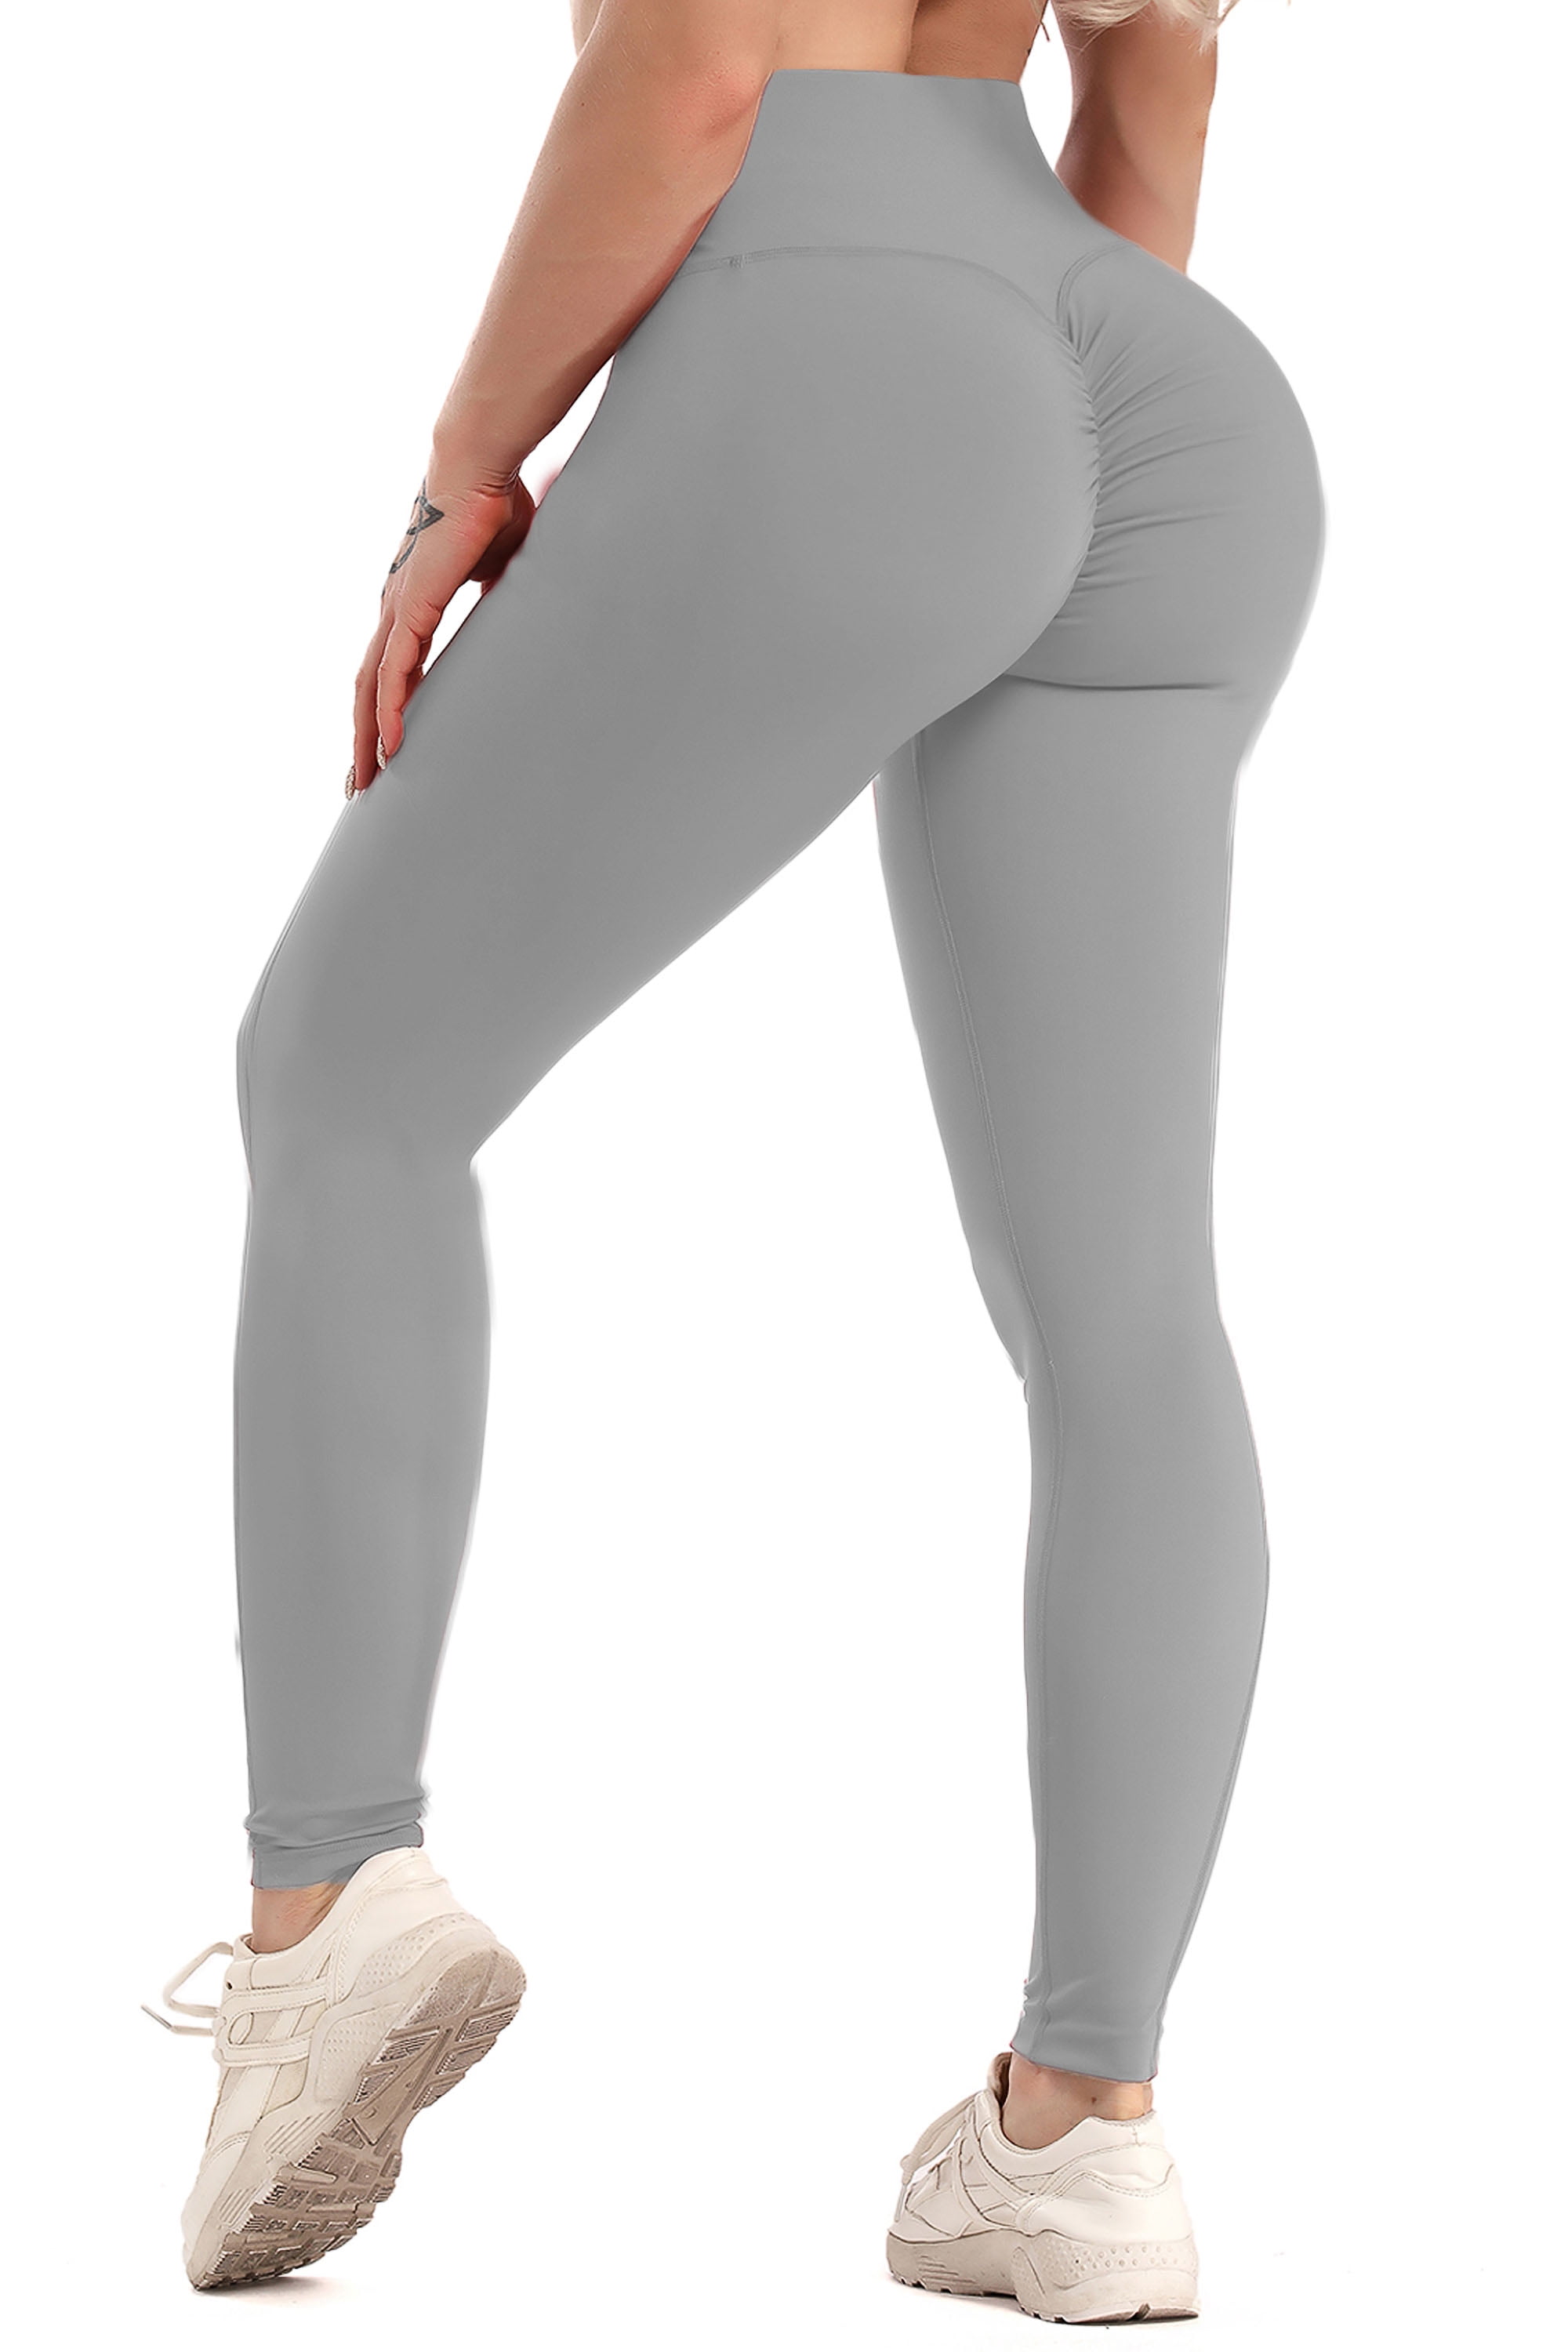 Women's Push Up Yoga Pants High Waist Ruched Leggings Sports Fitness Workout Hot